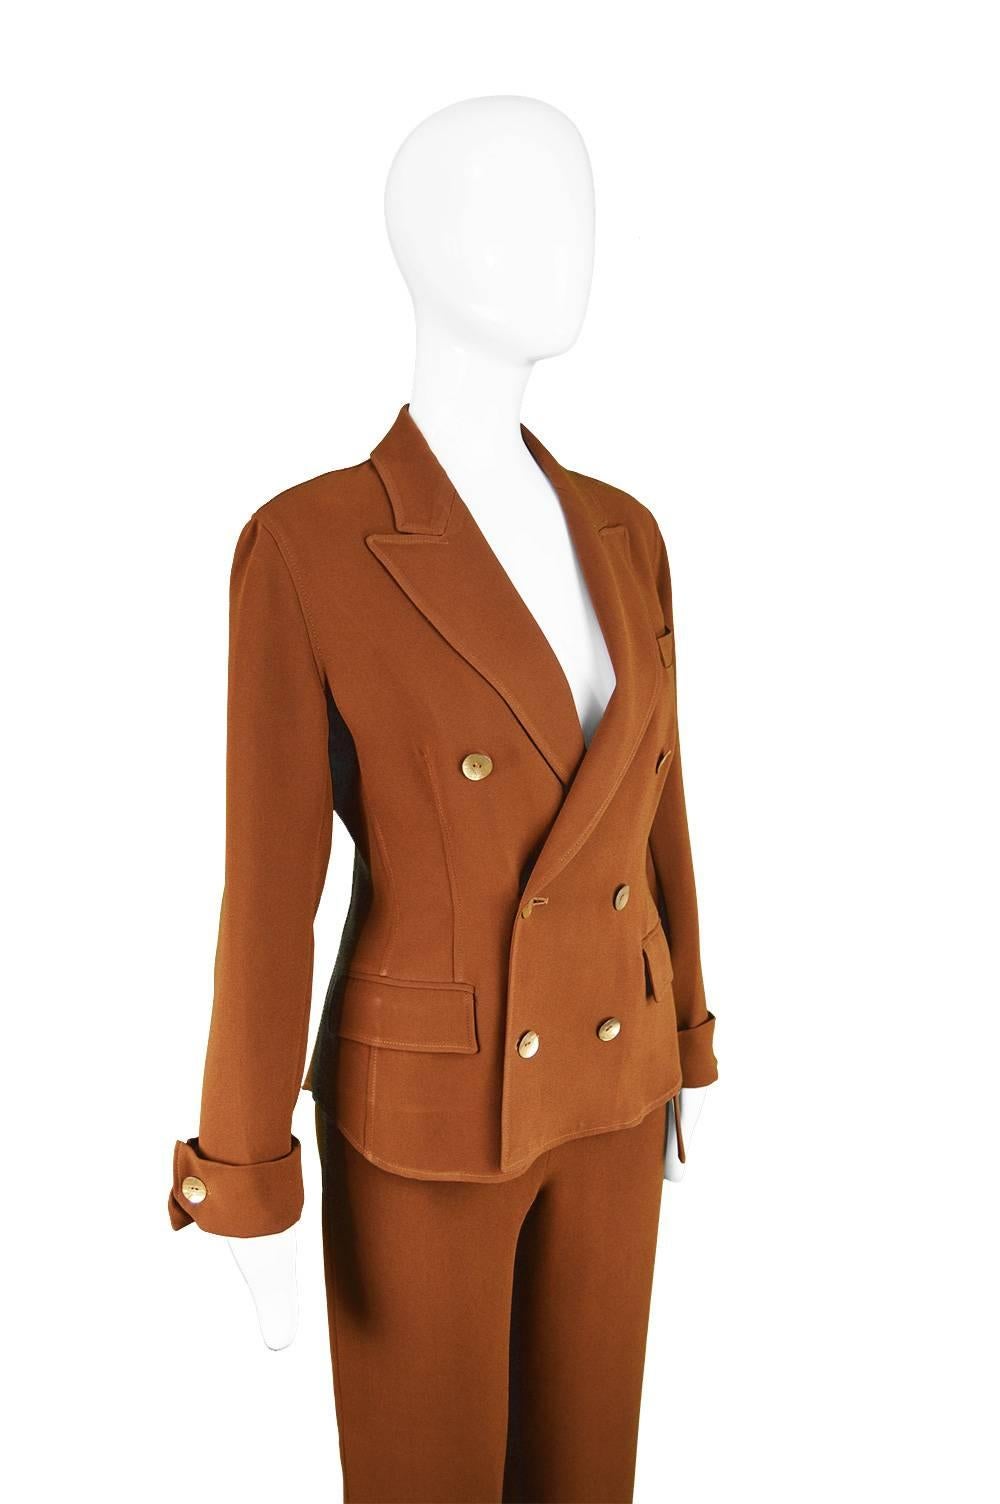 Jean Paul Gaultier Vintage Brown Crepe Wide Leg Palazzo Trouser Suit, 1990s  In Excellent Condition For Sale In Doncaster, South Yorkshire